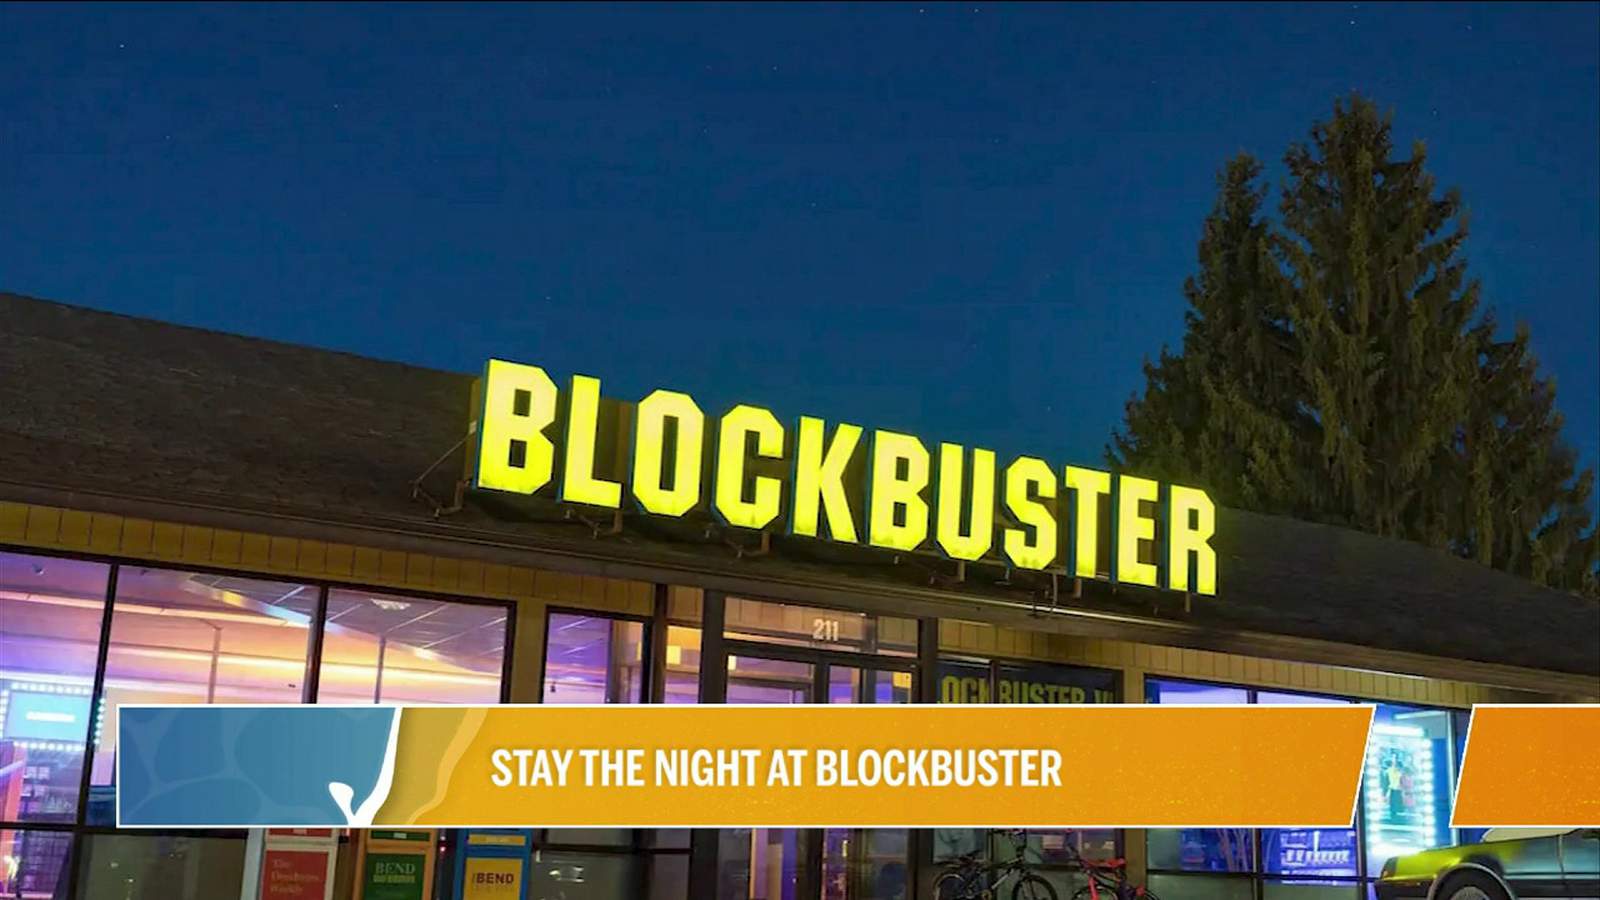 Host Chat: Blockbuster, Weird Products, and More! | River City Live